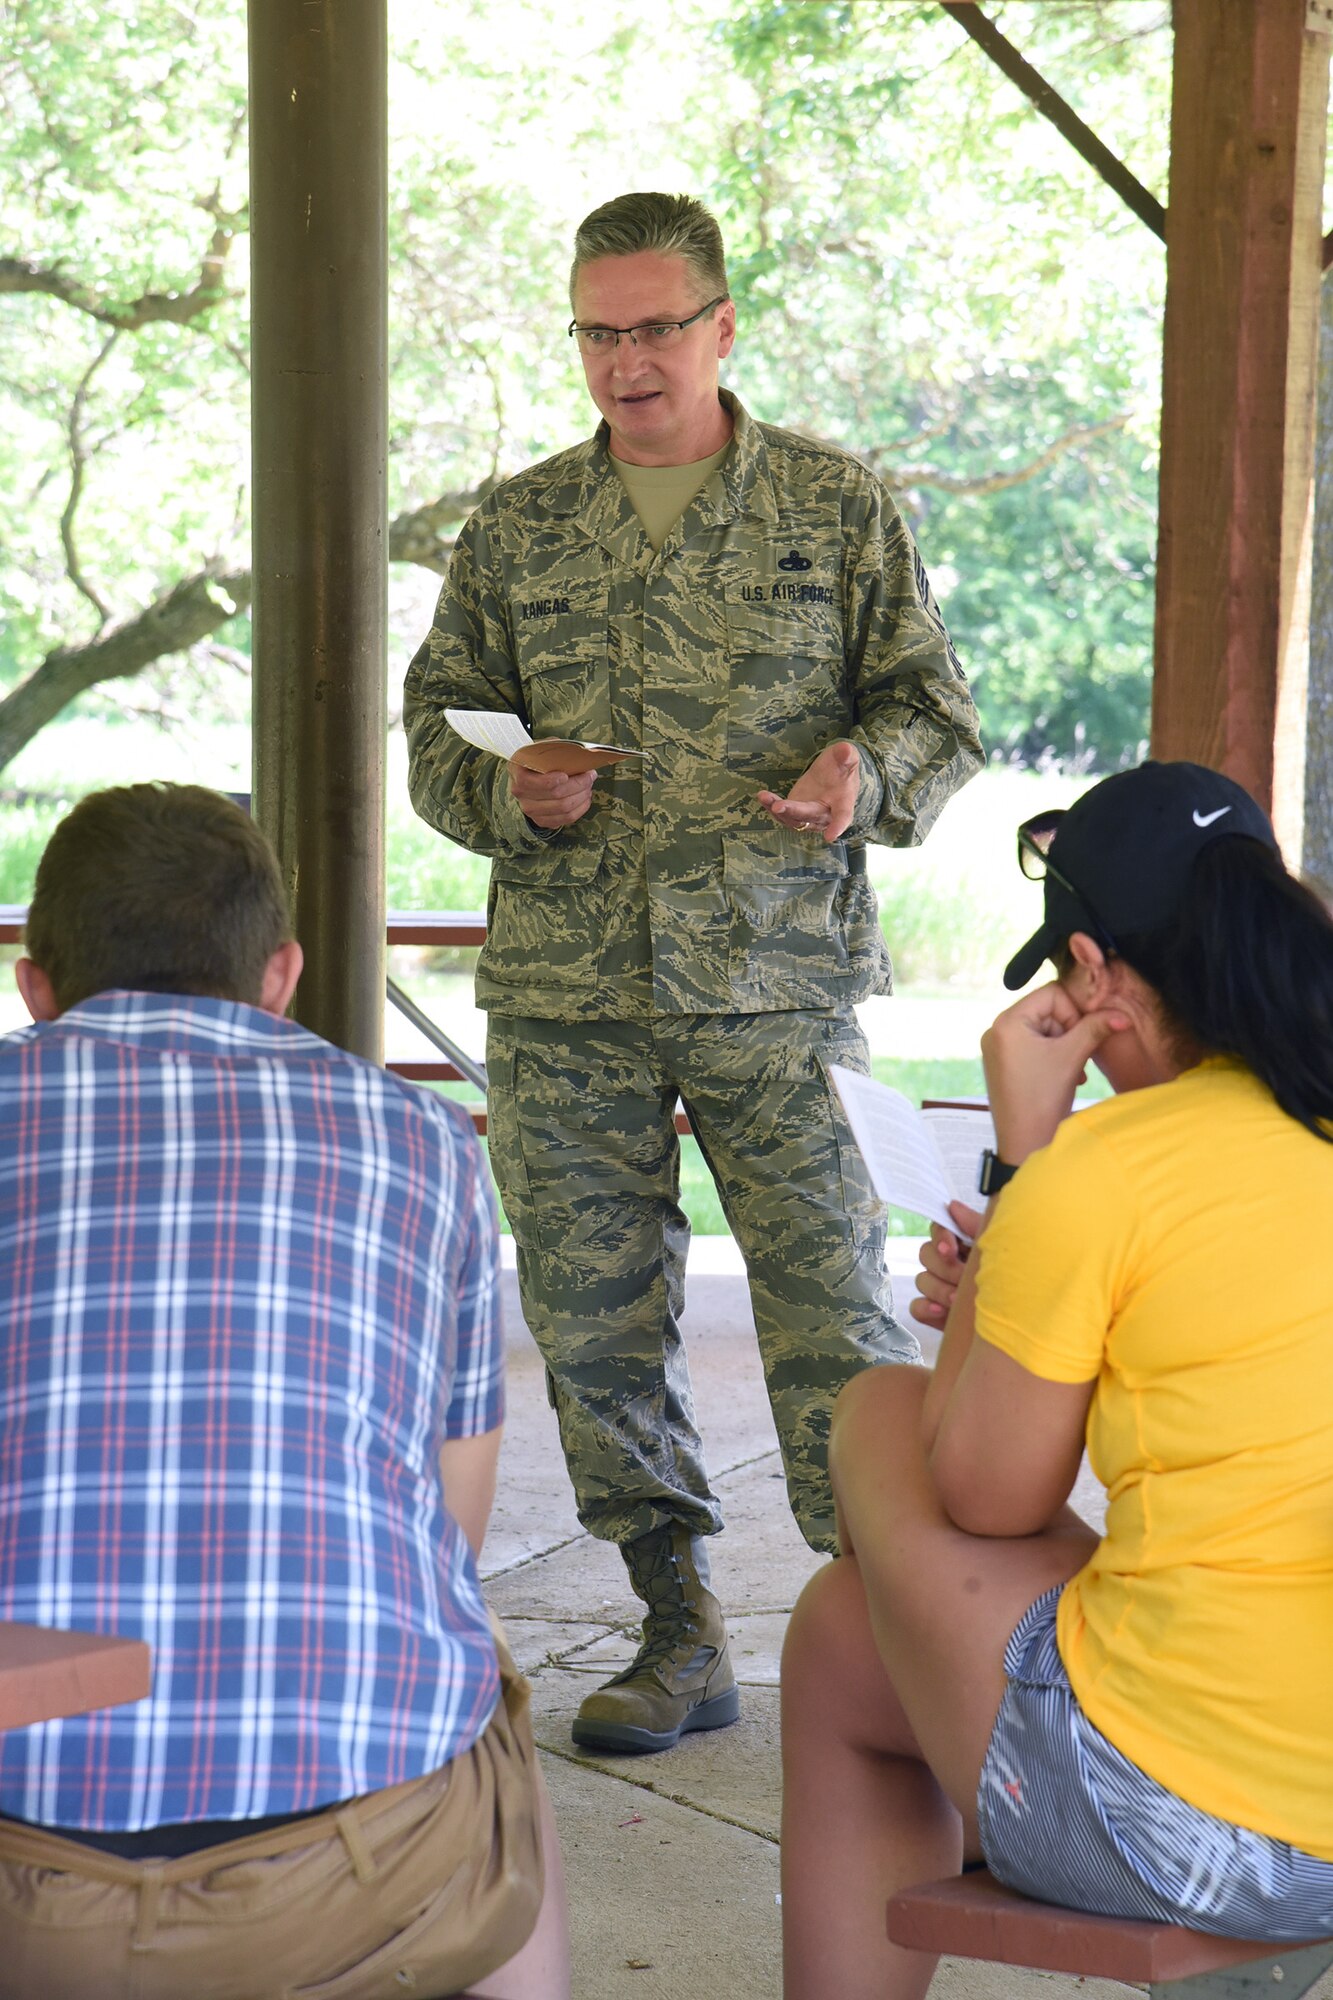 Chief Master Sgt. Duane Kangas, the 119th Wing command chief, standing, visits with members of the of the North Dakota Air National Guard junior enlisted advisory council (JEAC), during a leadership retreat at Fort Ransom State Park, near Fort Ransom, N.D., June 4, 2018.